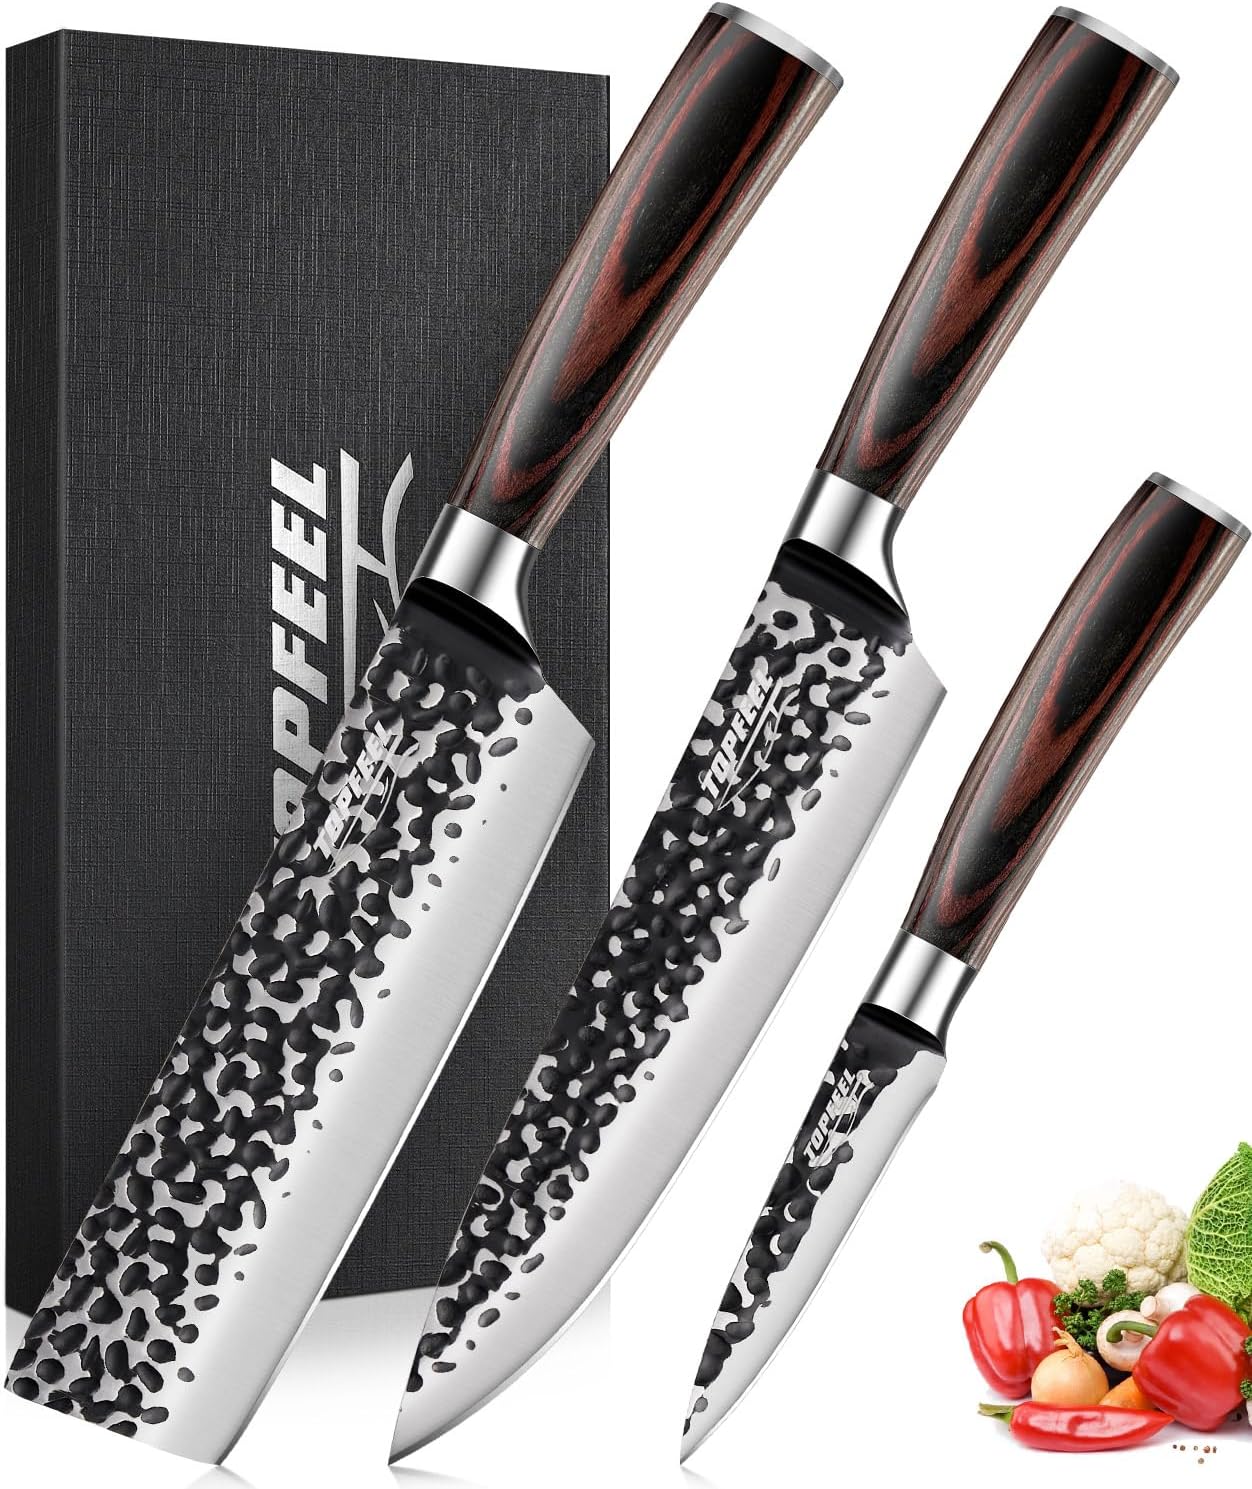 Topfeel 3PCS Professional Kitchen Knife Set Forged Hammered Japanese Chef Knife Sharp German High Carbon Stainless Steel 8 inch Chef' Knife 7 inch Nakiri Knife 5 inch Utility Knife